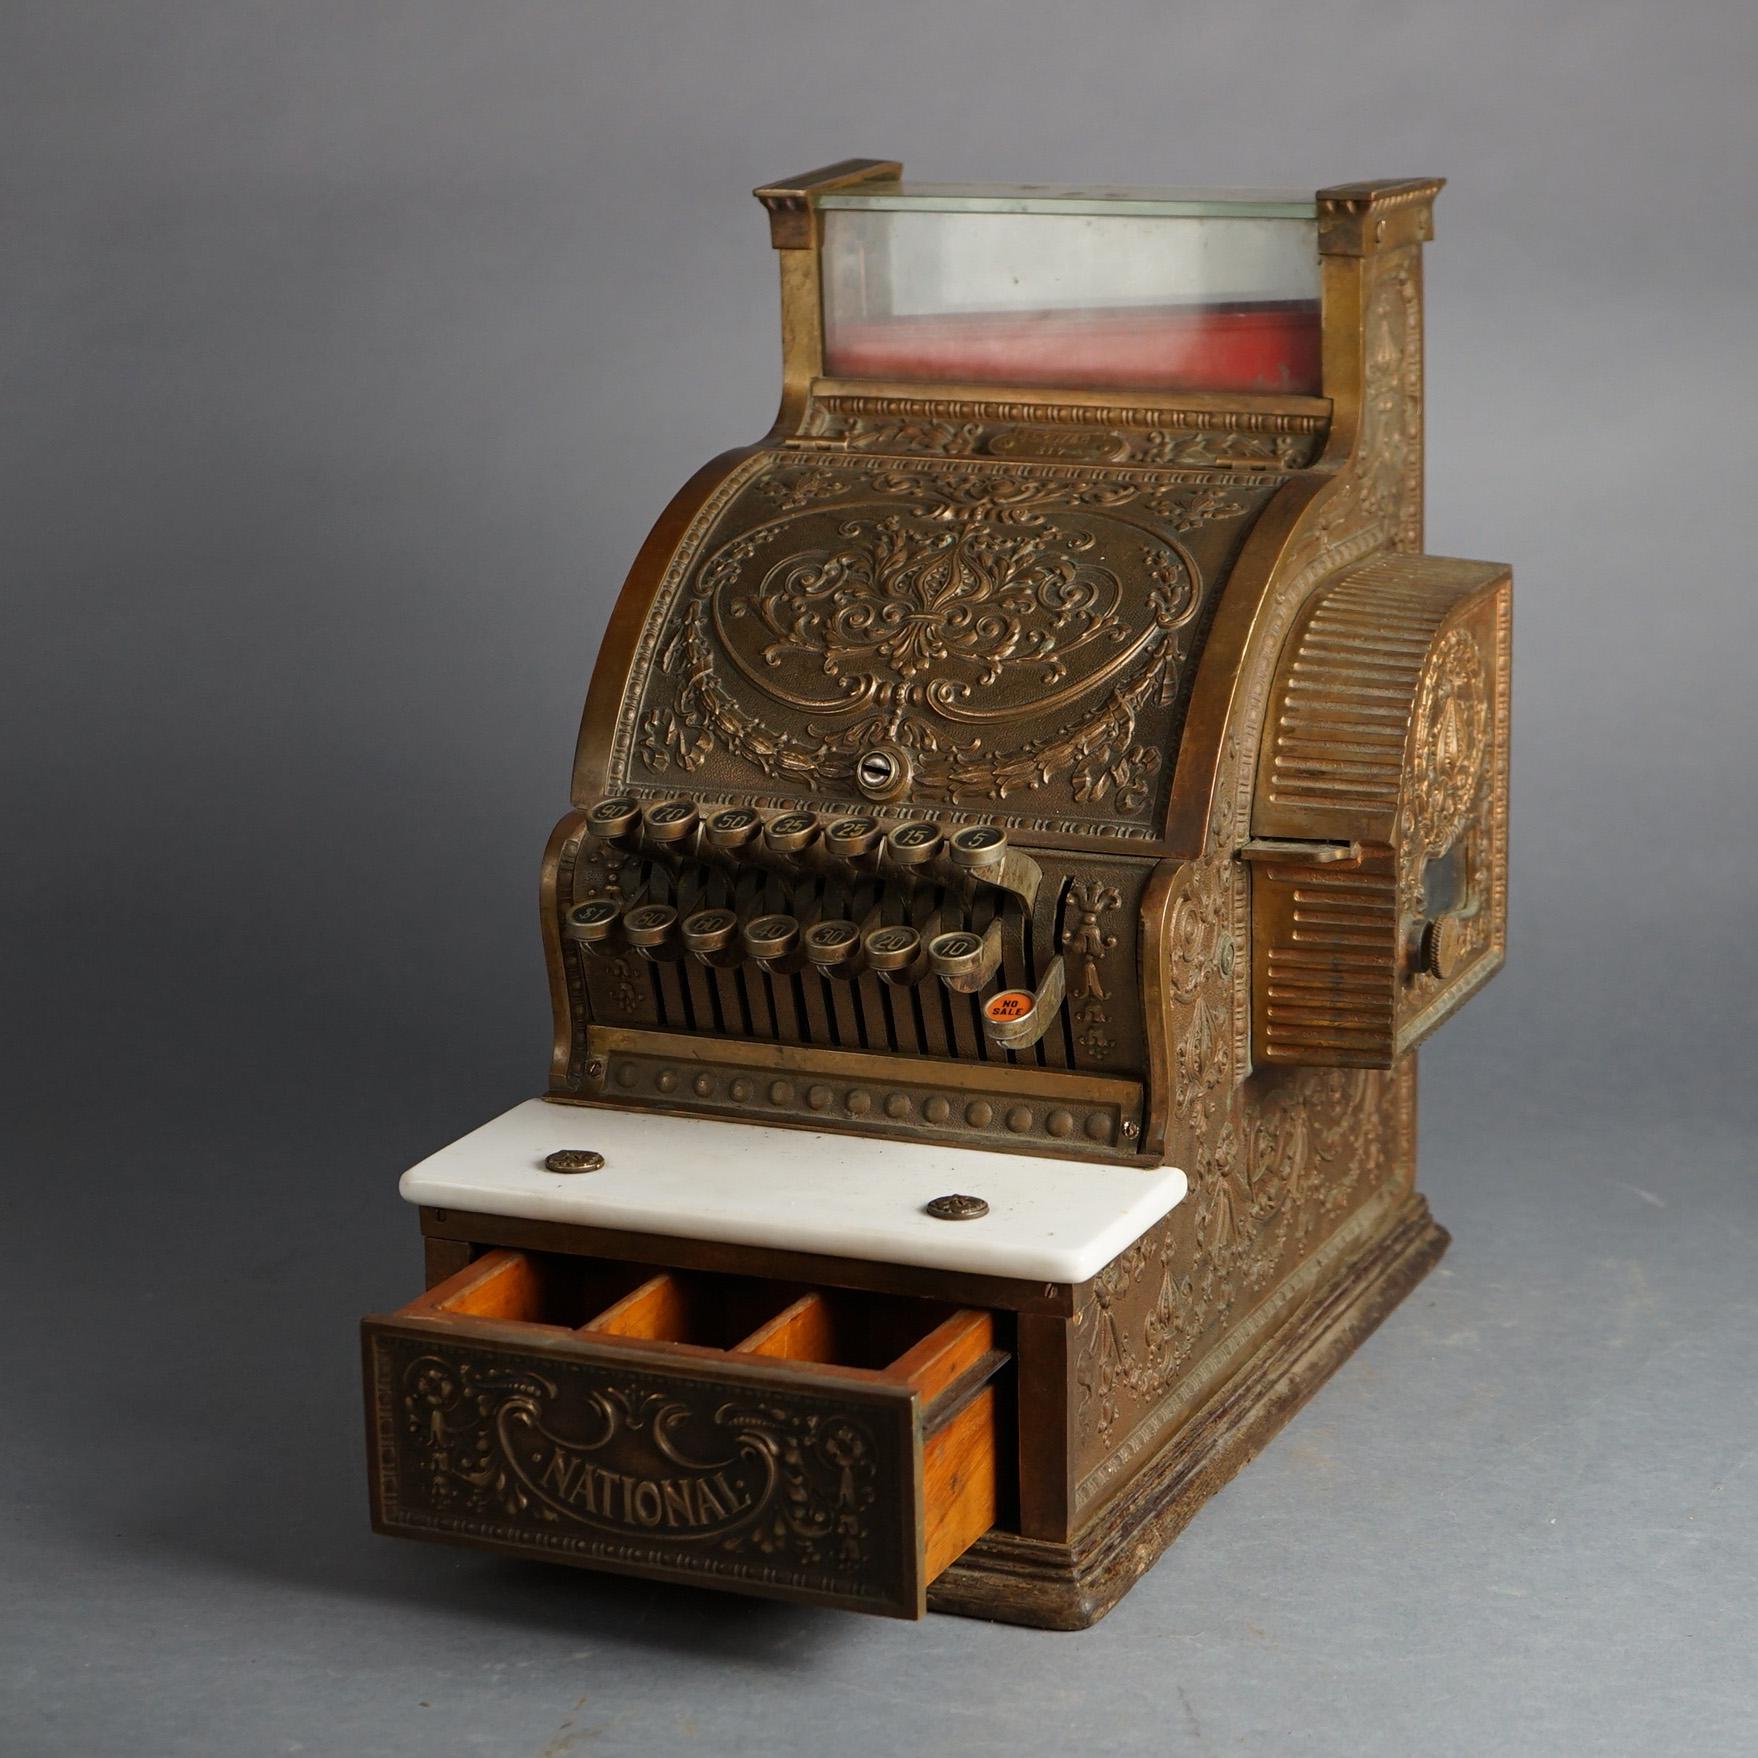 Antique National Brass Candy Store Cash Register with Foliate Embossed Case & Marble Tray Circa 1900

Measures - 17.25